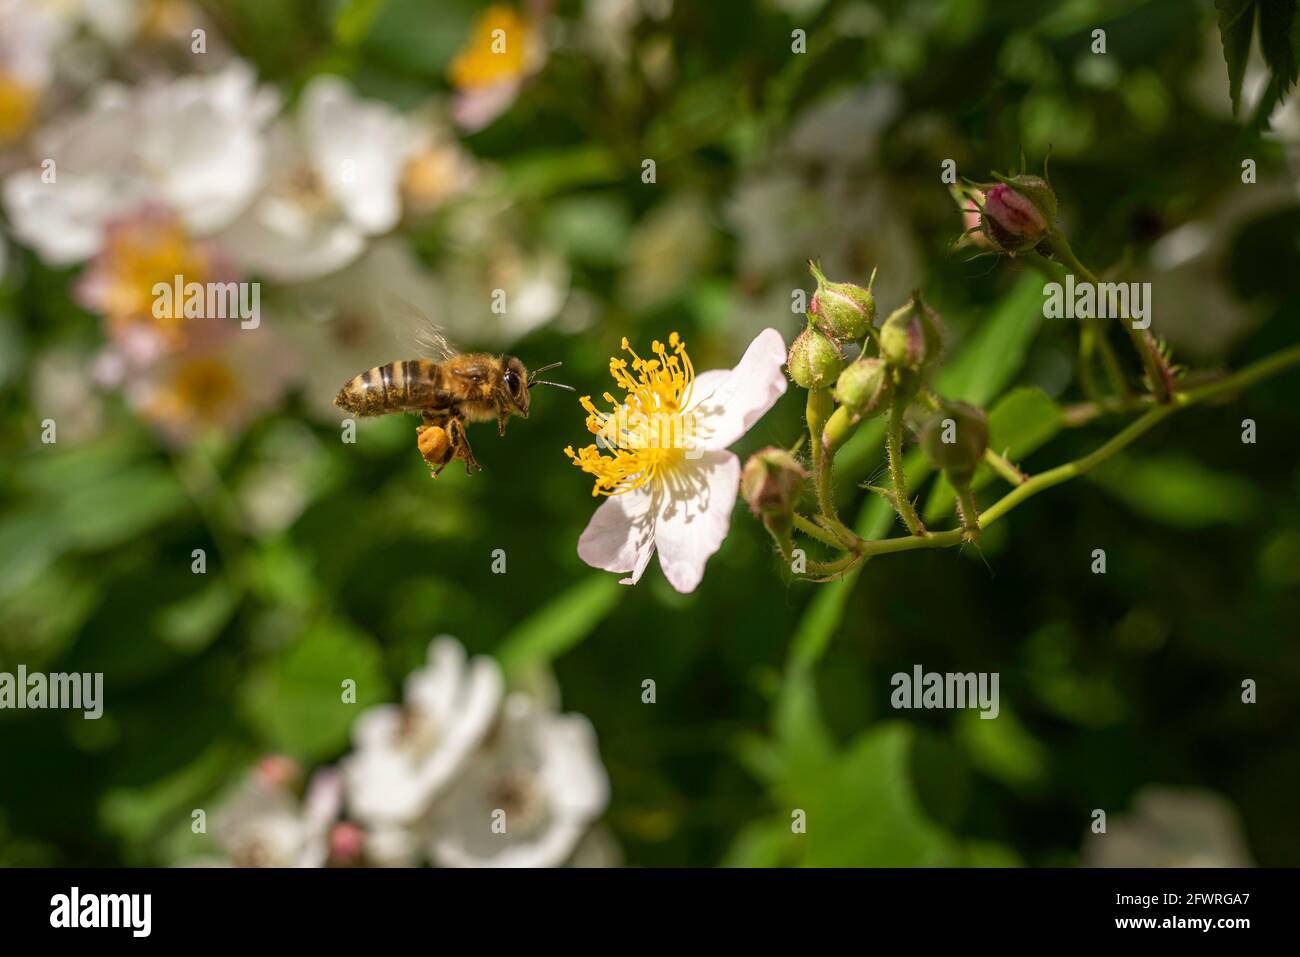 Honey bee flying closer to Silky Rose flower during pollination. The bee has a lot of visible collected pollen on the legs. Stock Photo